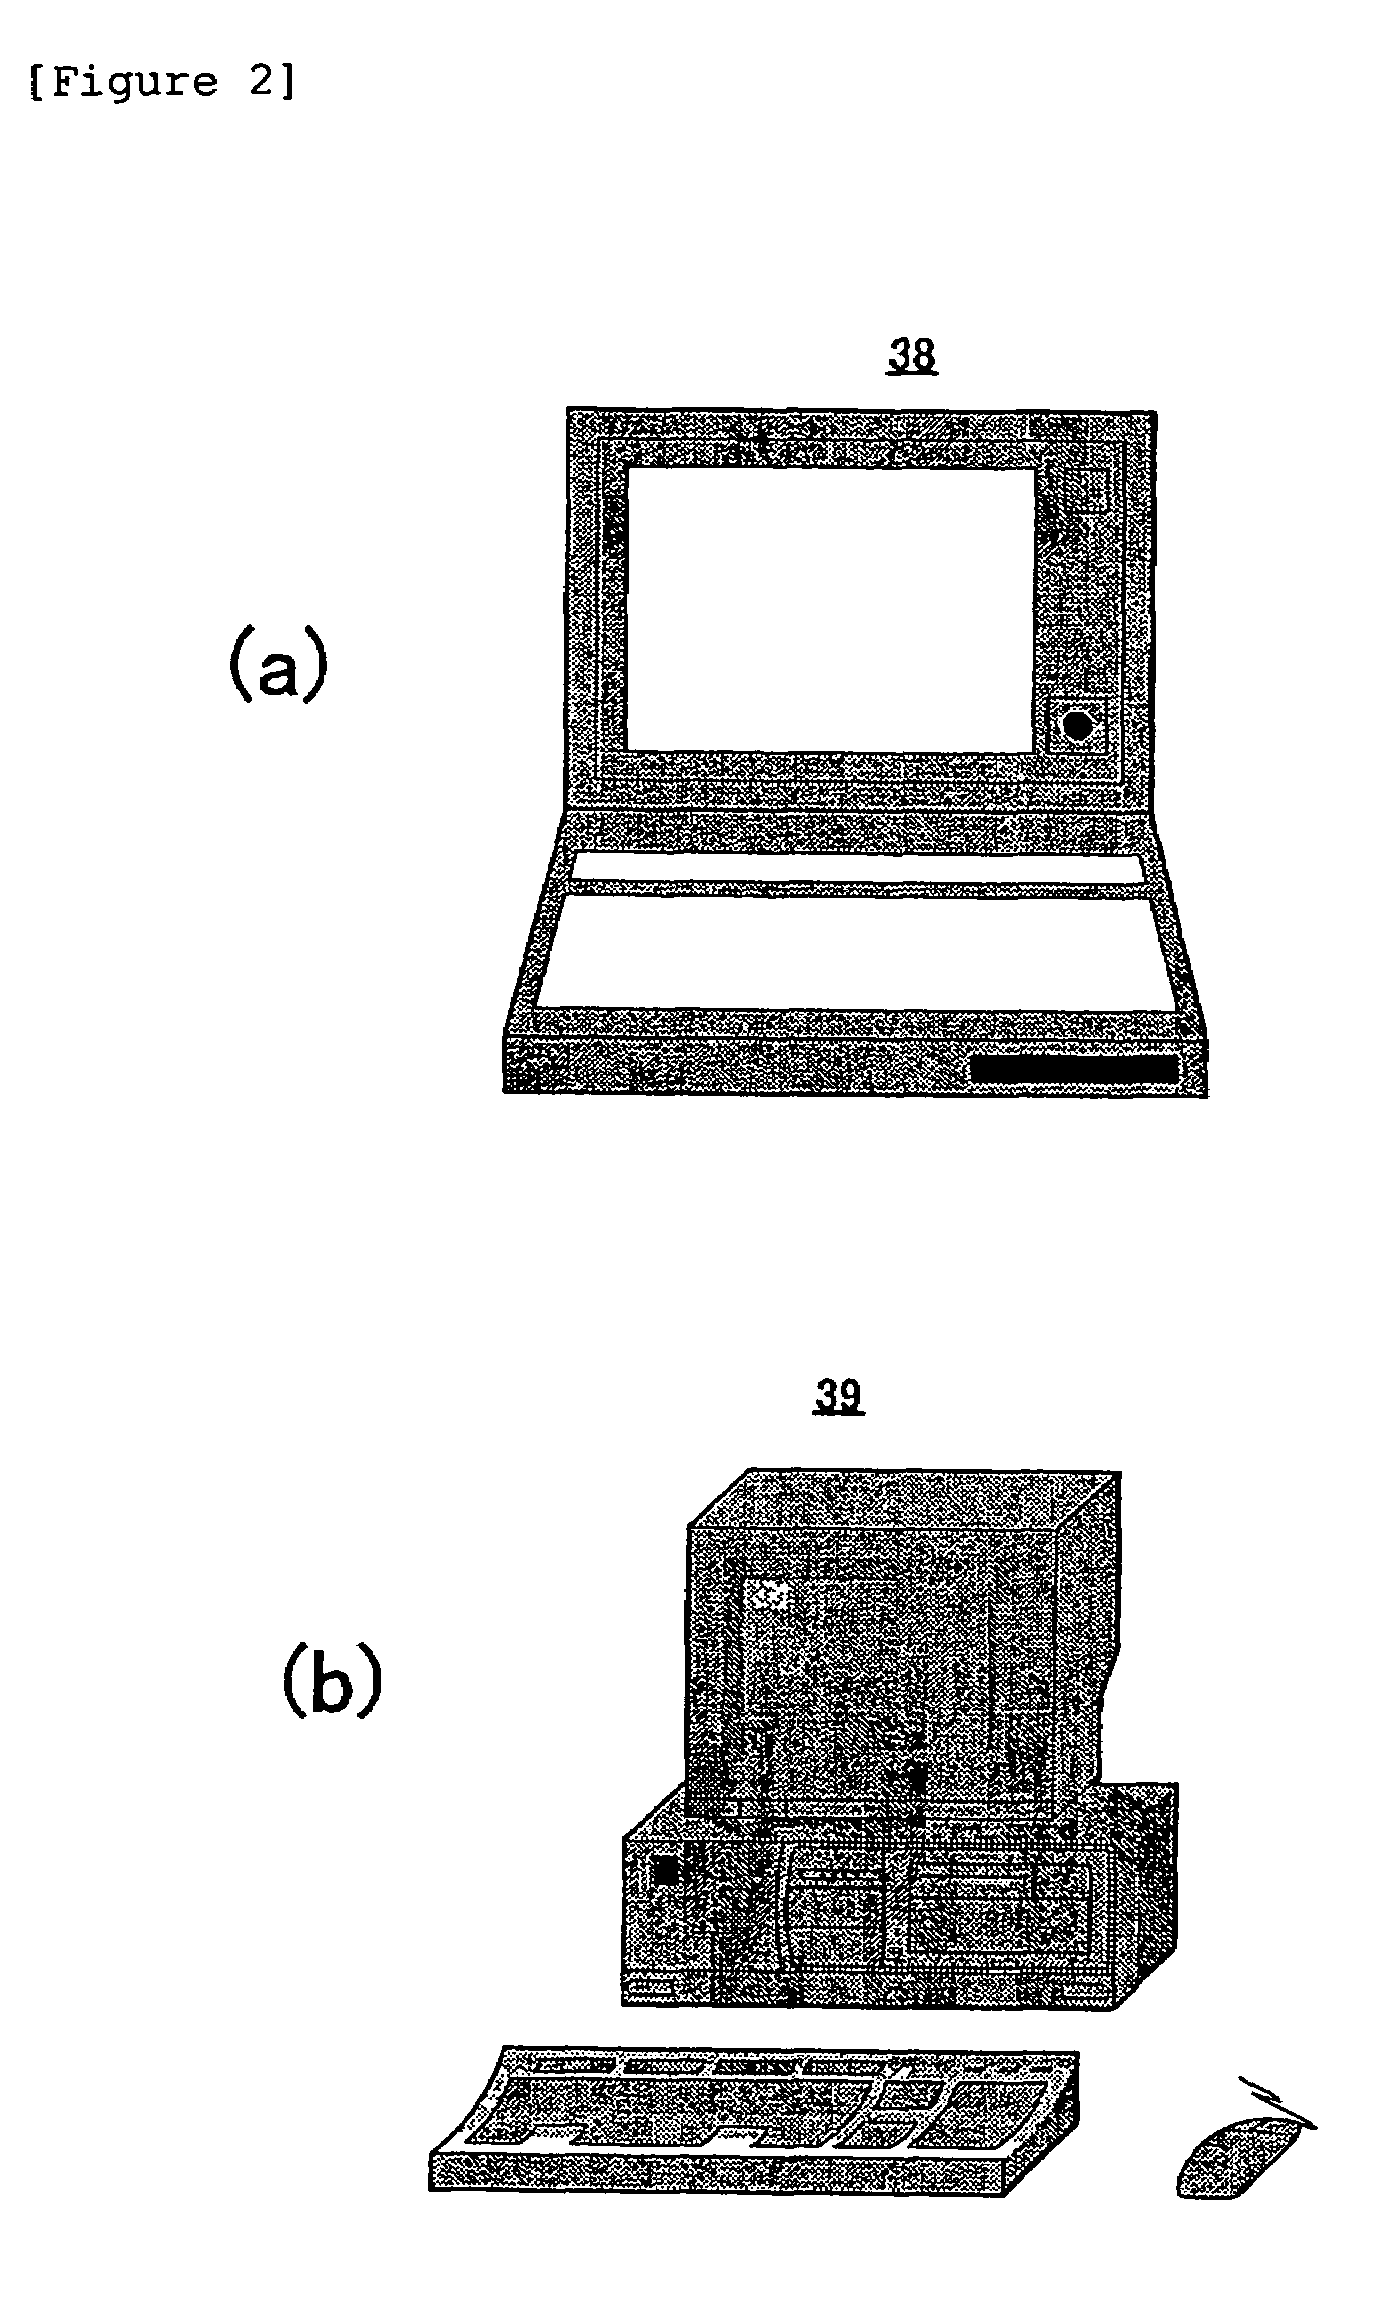 Information processing apparatus for secure information recovery